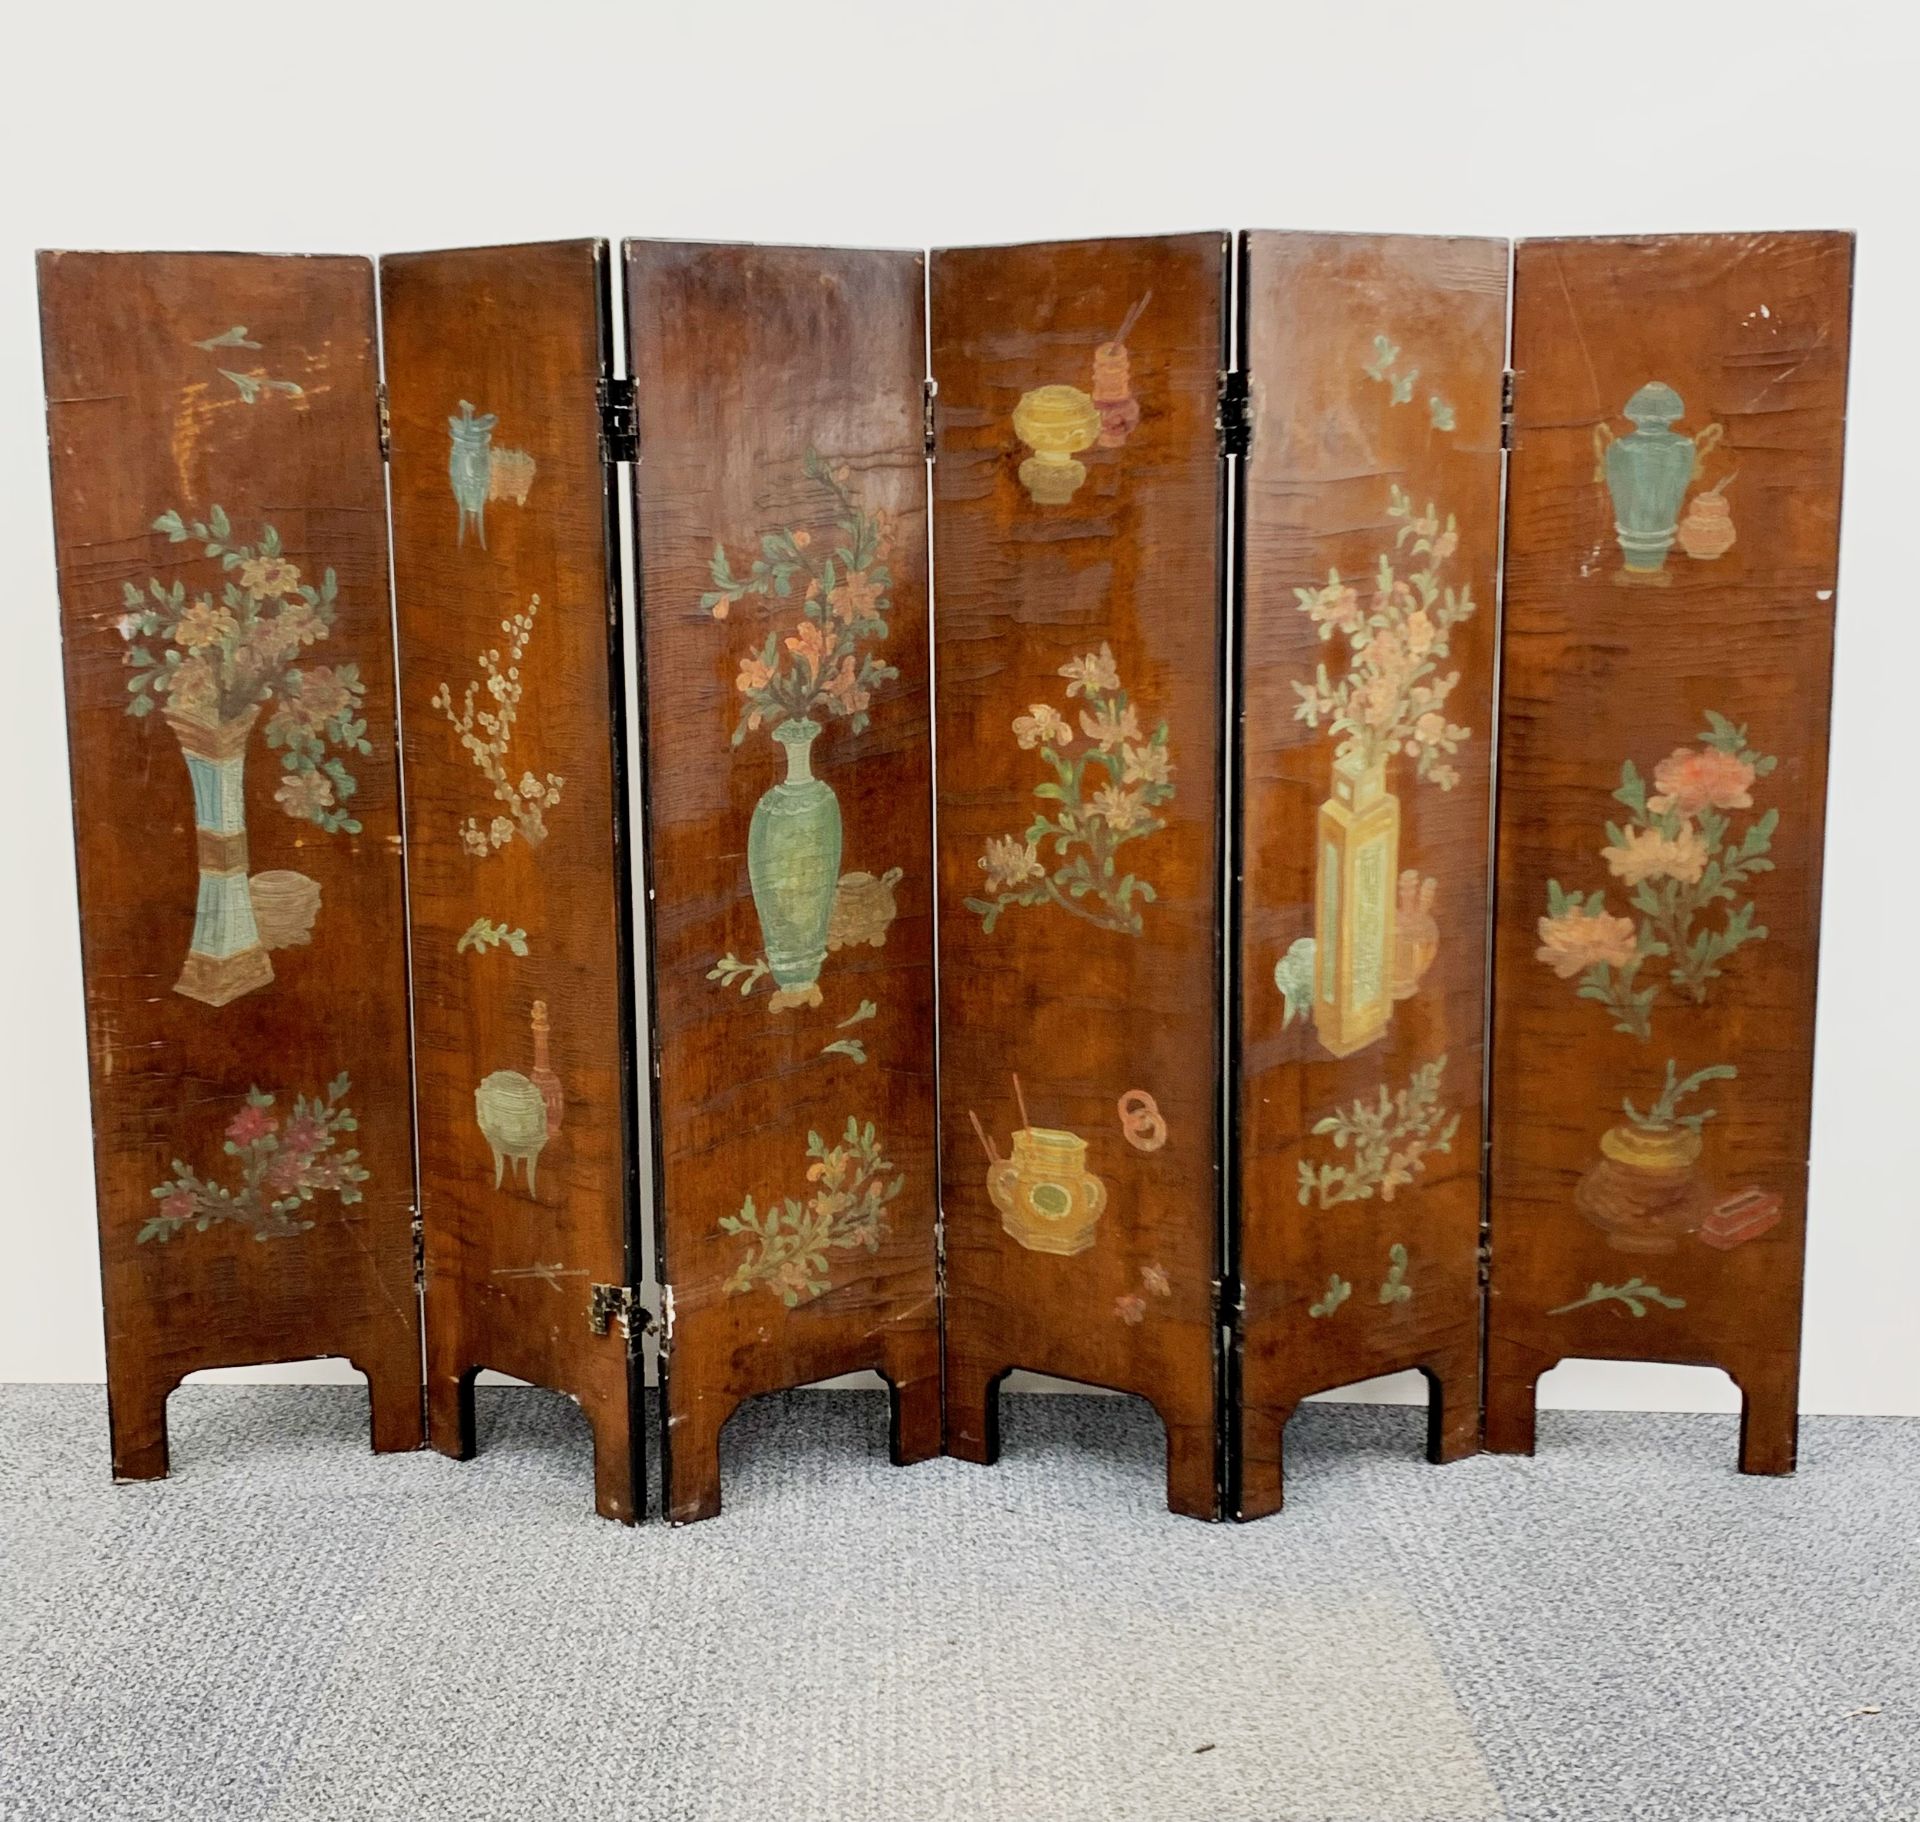 A mid-20th century Chinese hand-painted folding lacquer screen, H. 99cm. each panel W. 25cm.